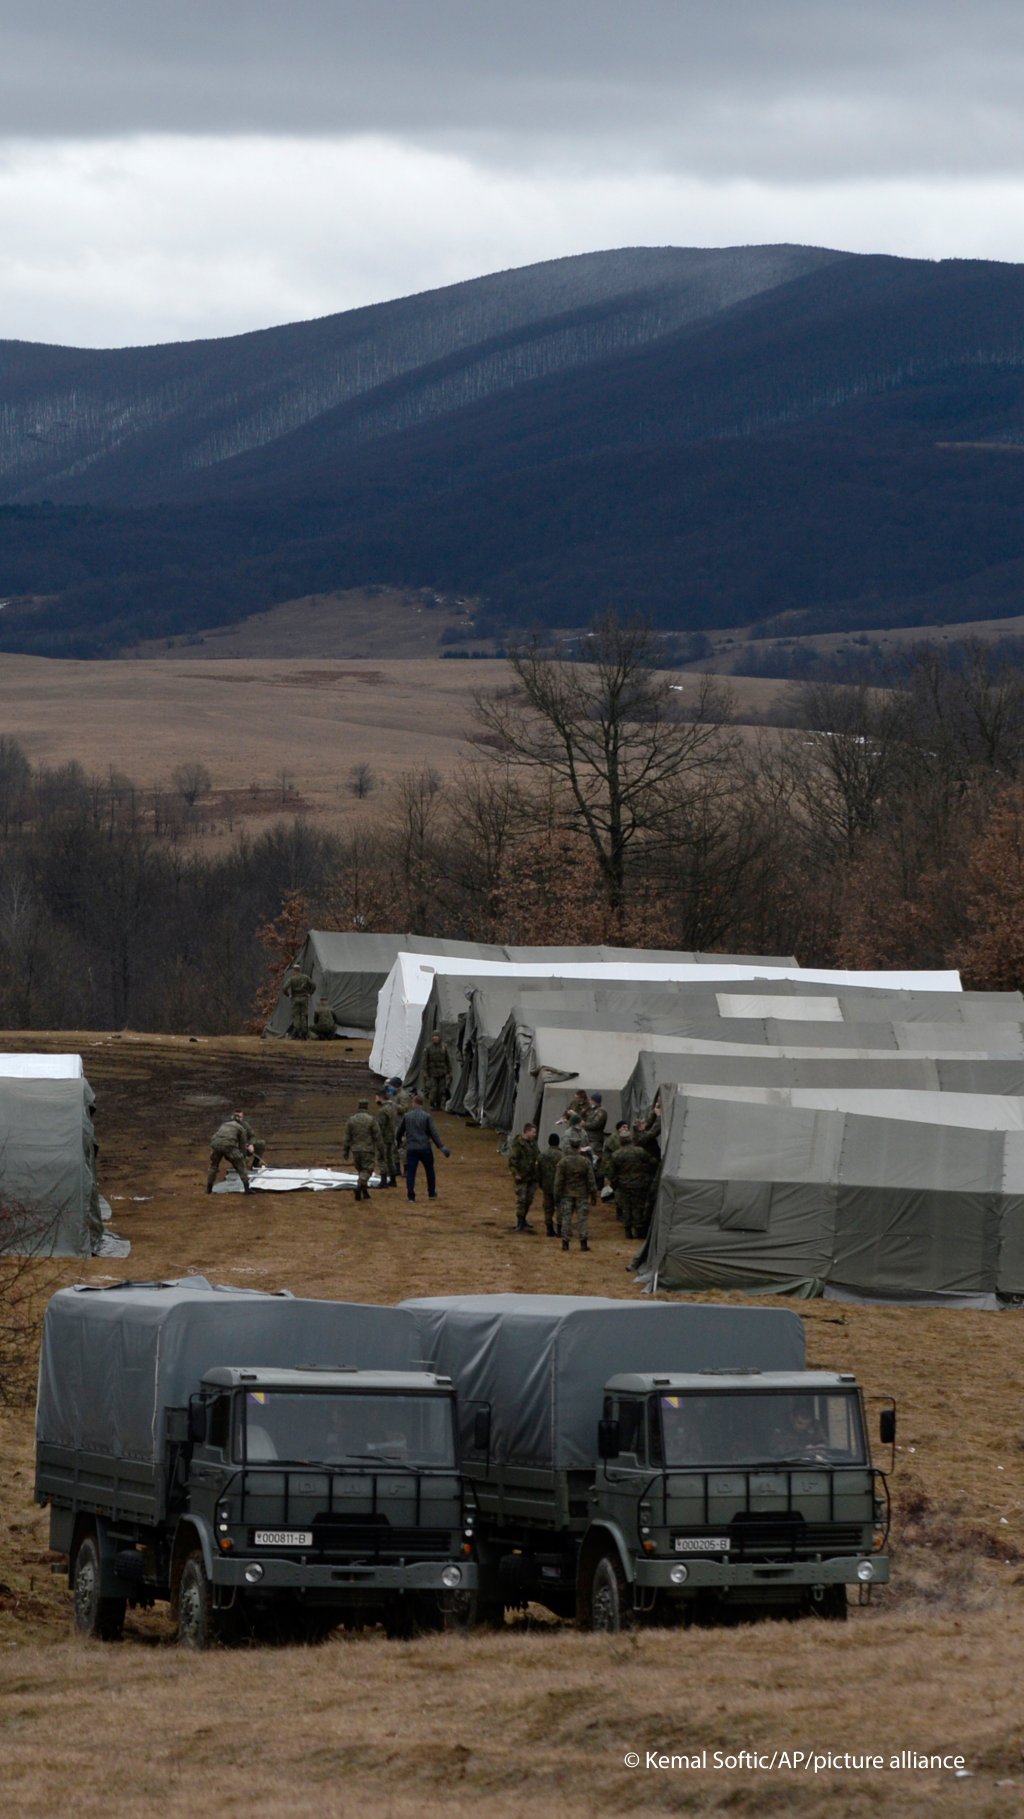 The Bosnian army on January 1, 2021 started to set up tents near the devastated camp in Lipa to provide temporary accommodation to the hundreds of migrants who have been left without shelter | Photo: Picture alliance/dpa/AP/Kemal Softic